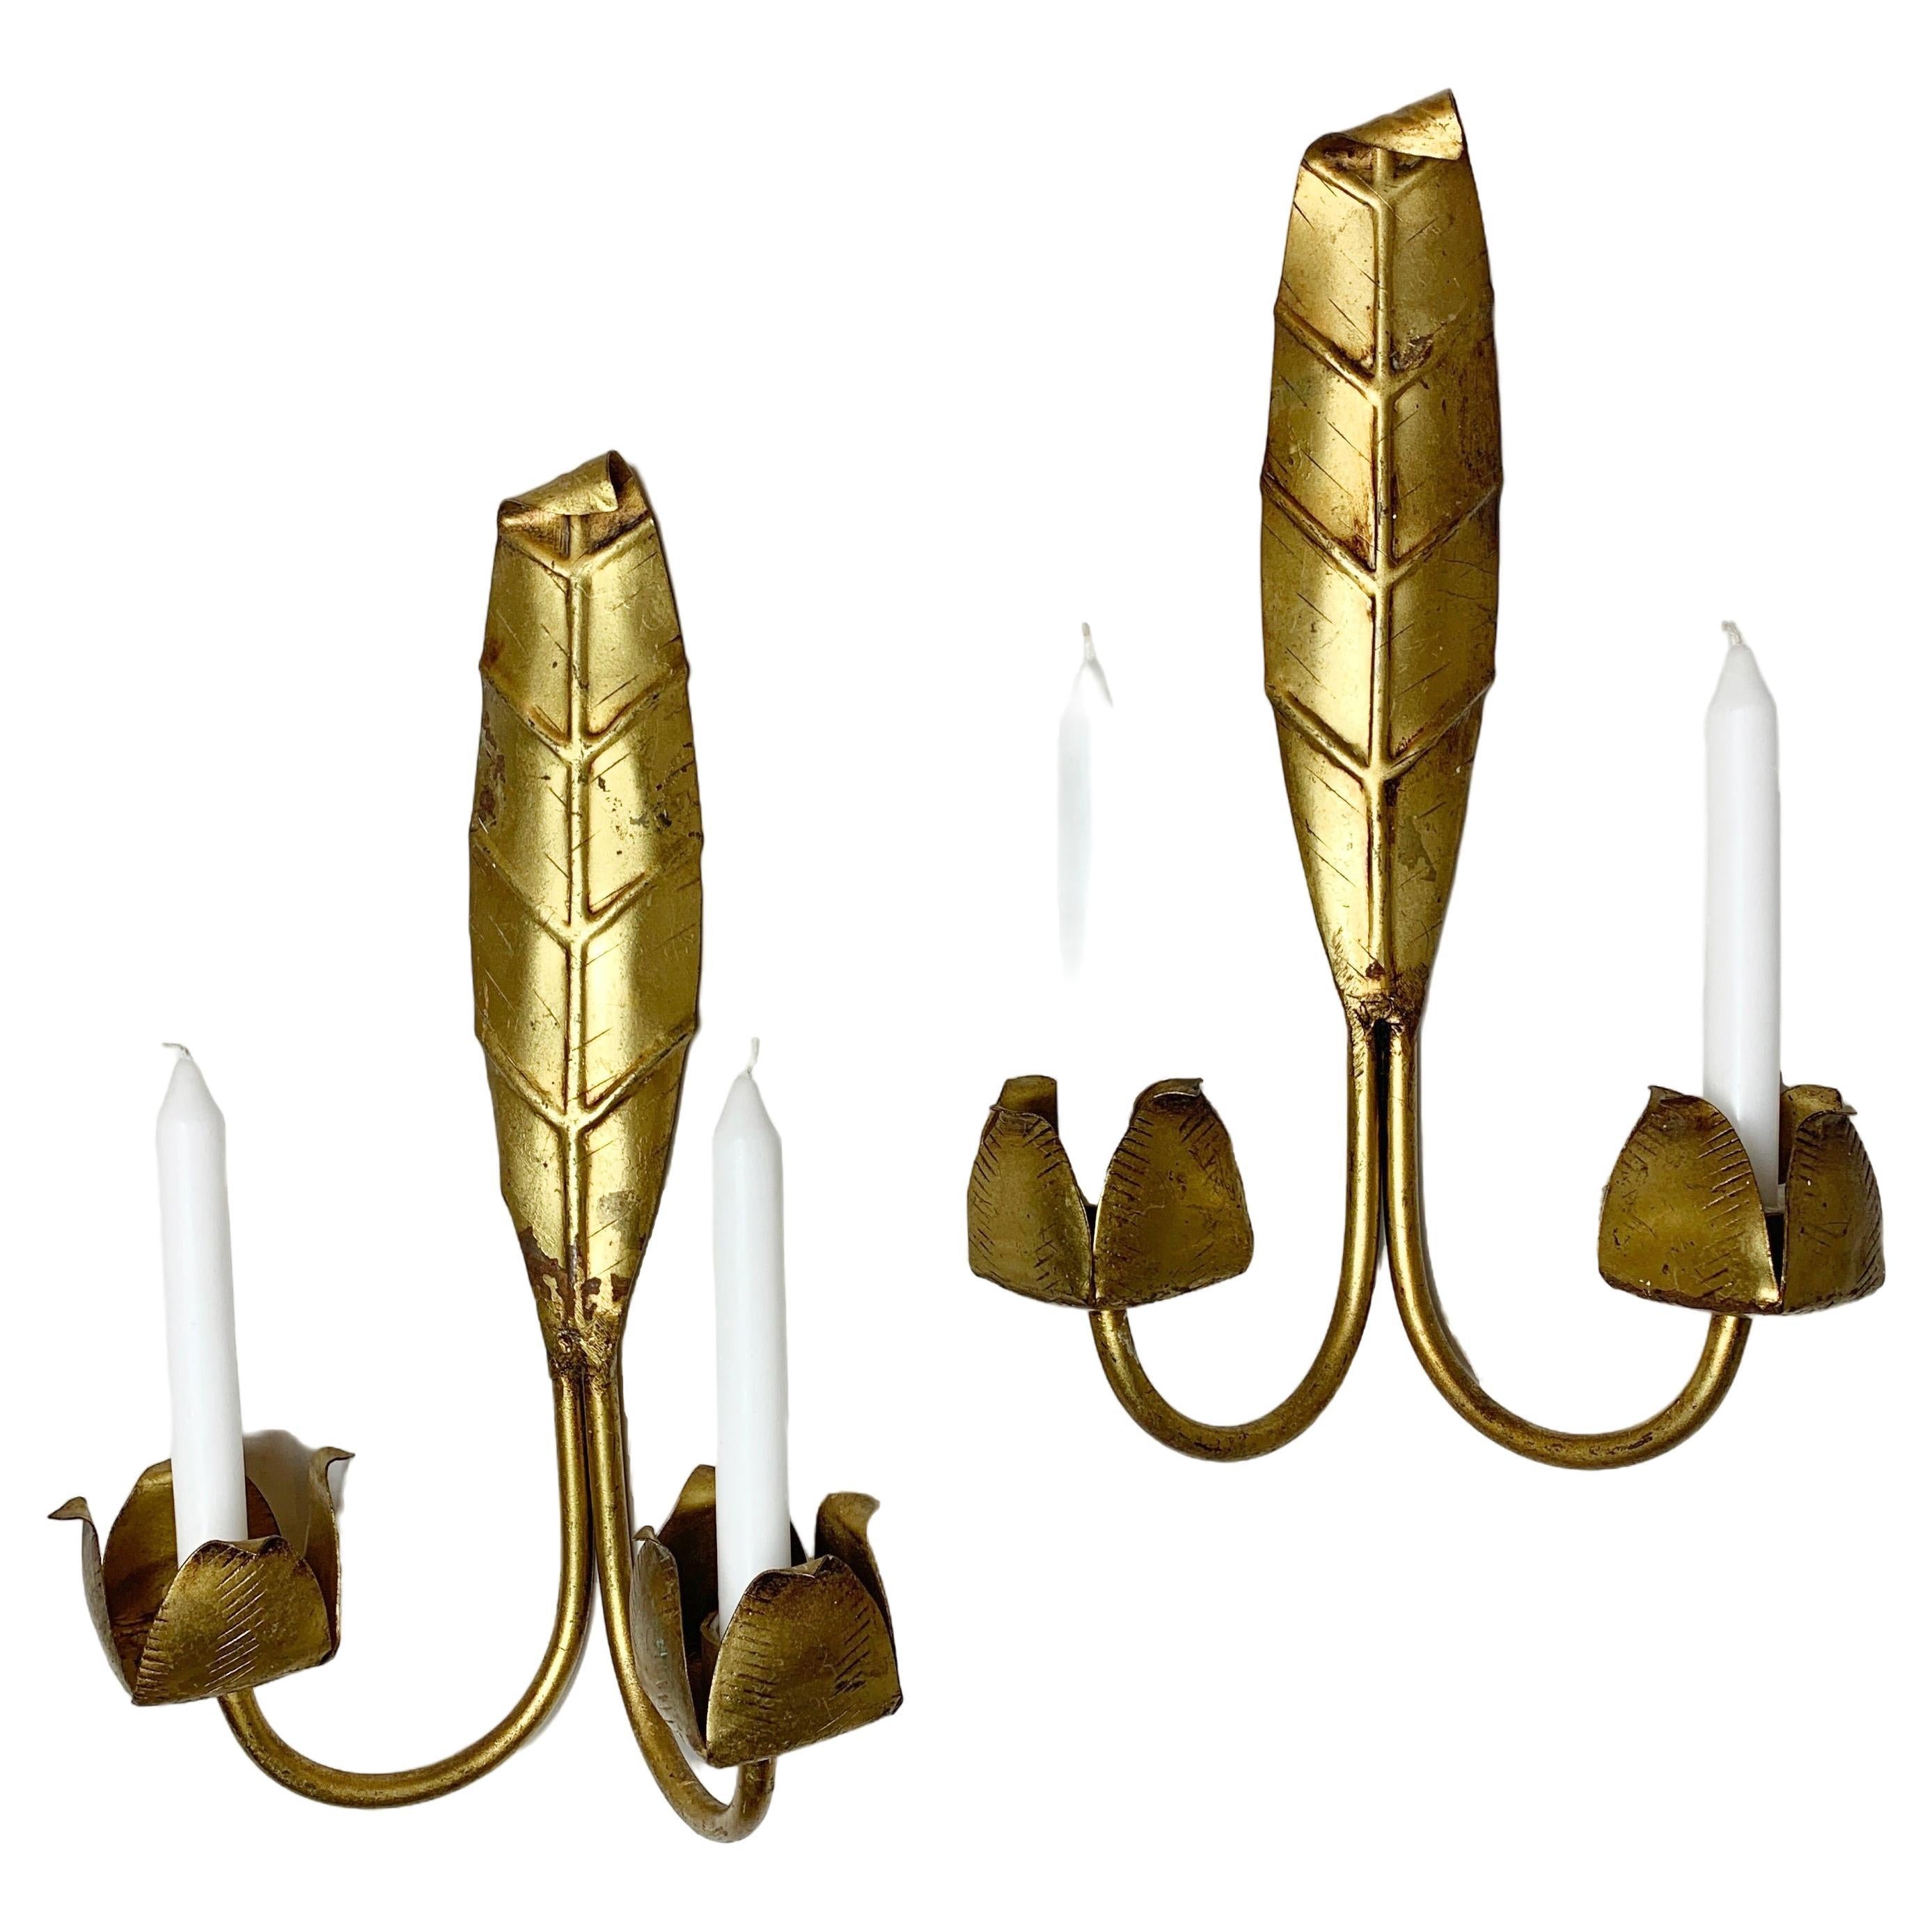 What is a candle sconce?